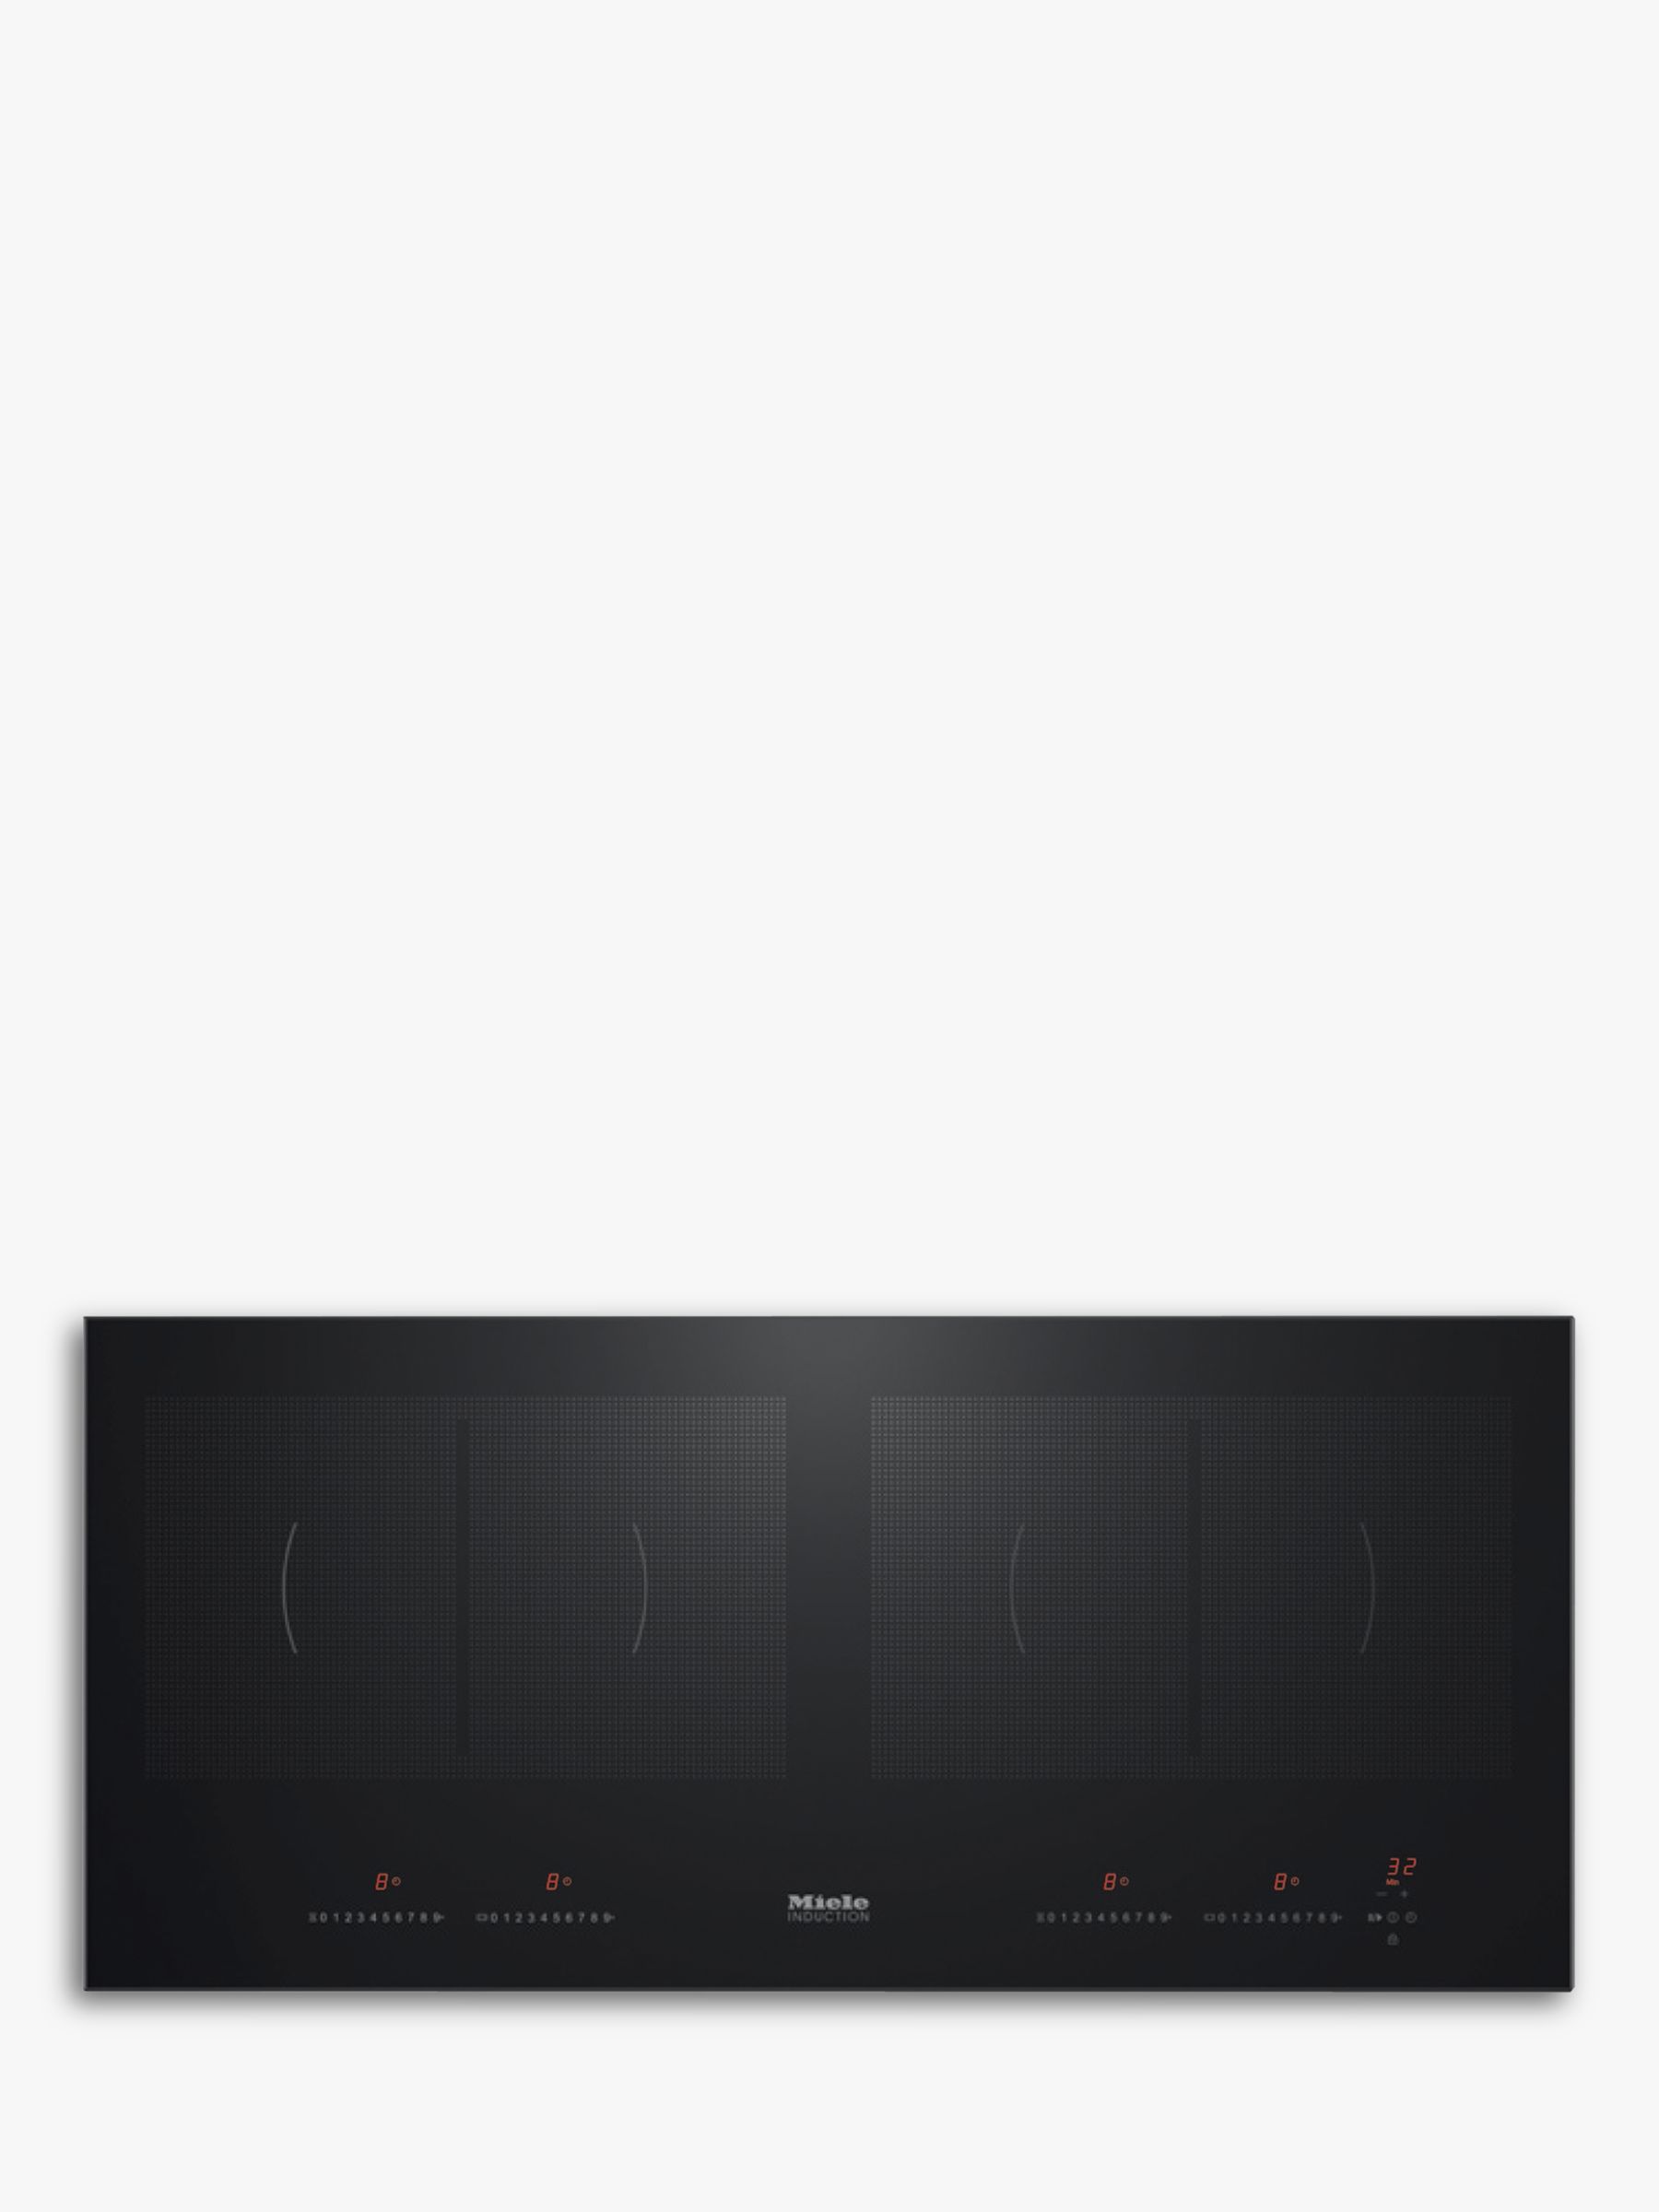 Miele KM6381 Integrated Induction Hob